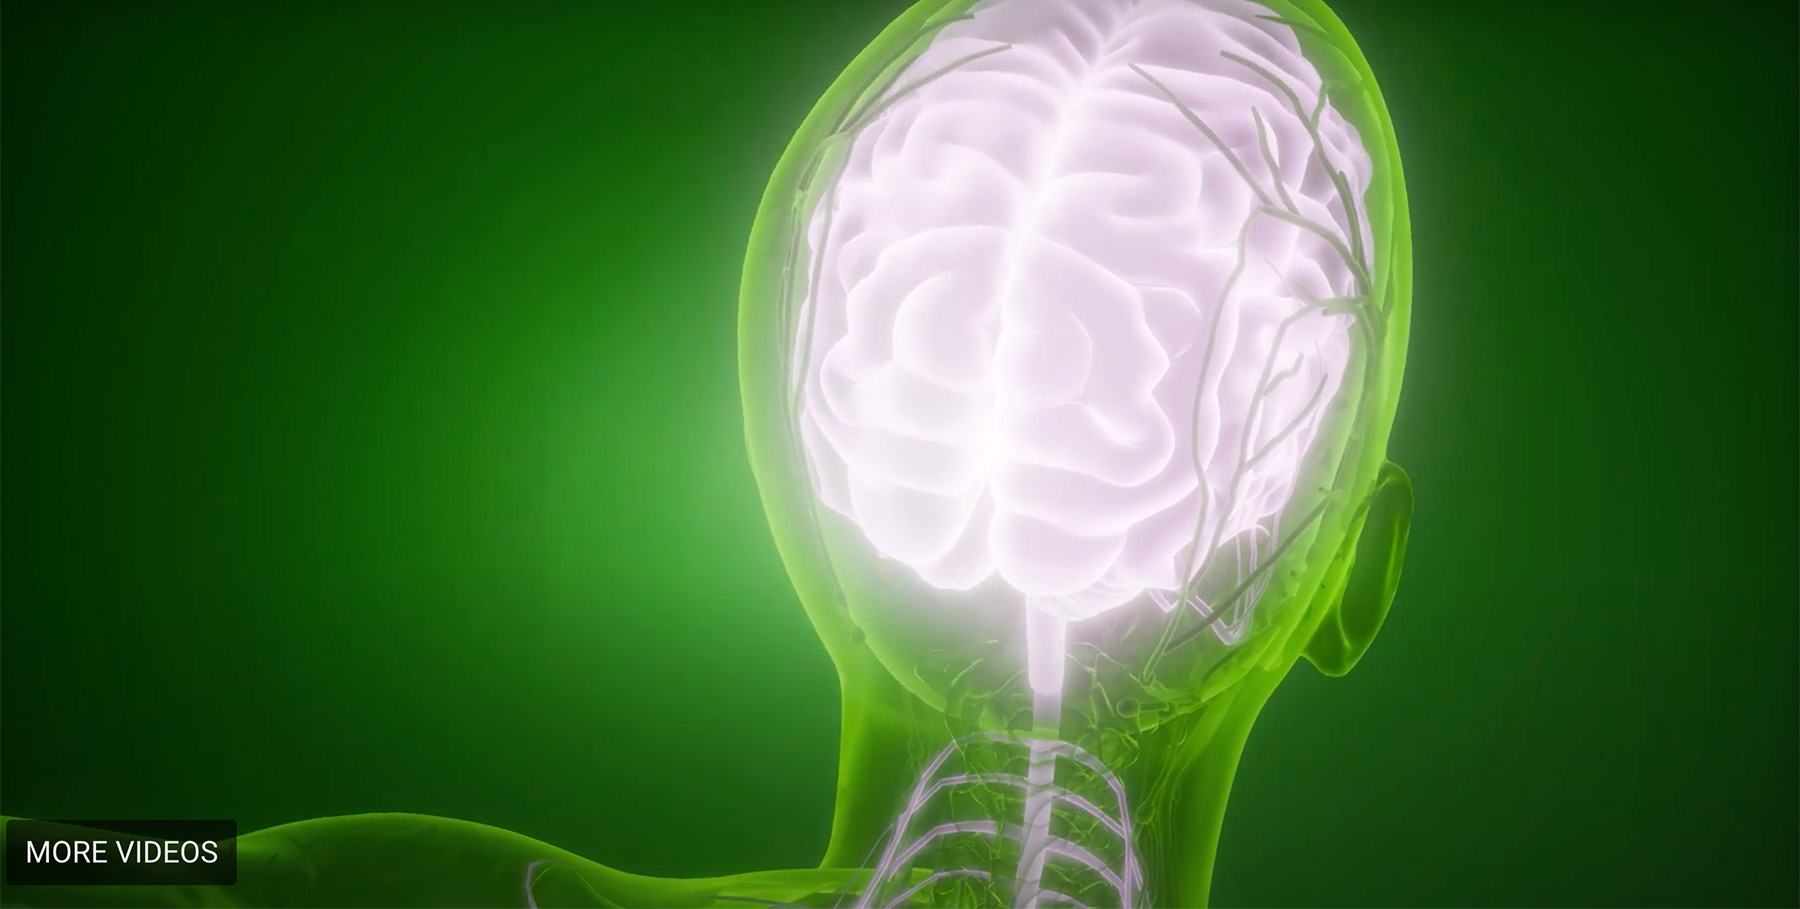 Brain graphic illustrating migraines on a green background.